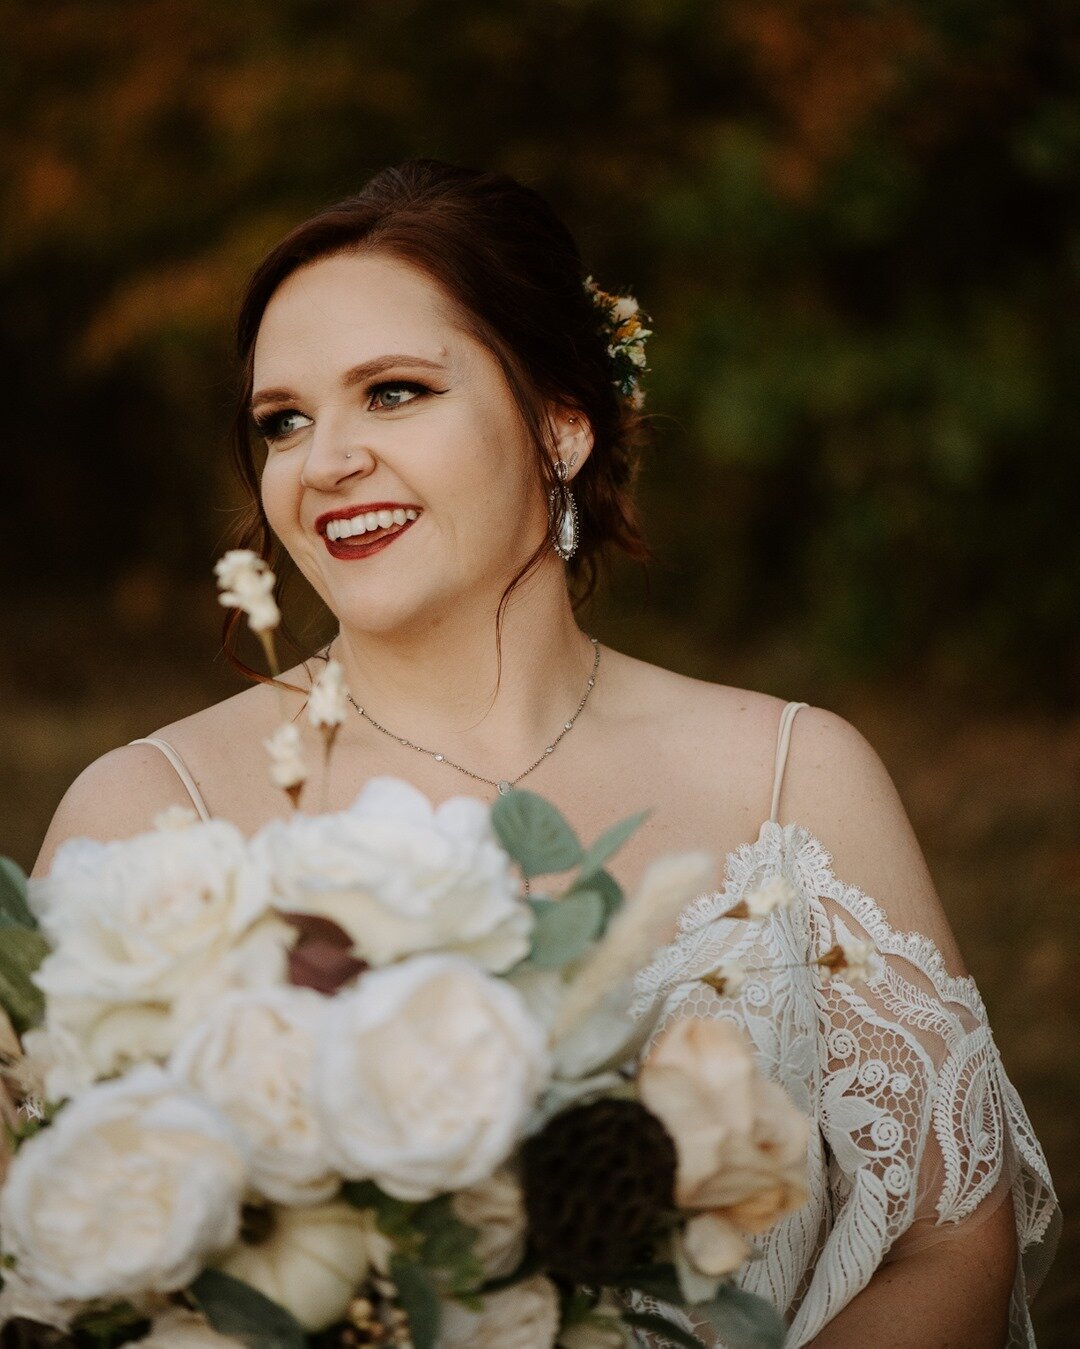 As a makeup artist, your desired look for your wedding is very important to me! It is my job to make sure you trust me and love what I create for you even after your wedding is over and you look back on your wedding photos. I always encourage a neutr